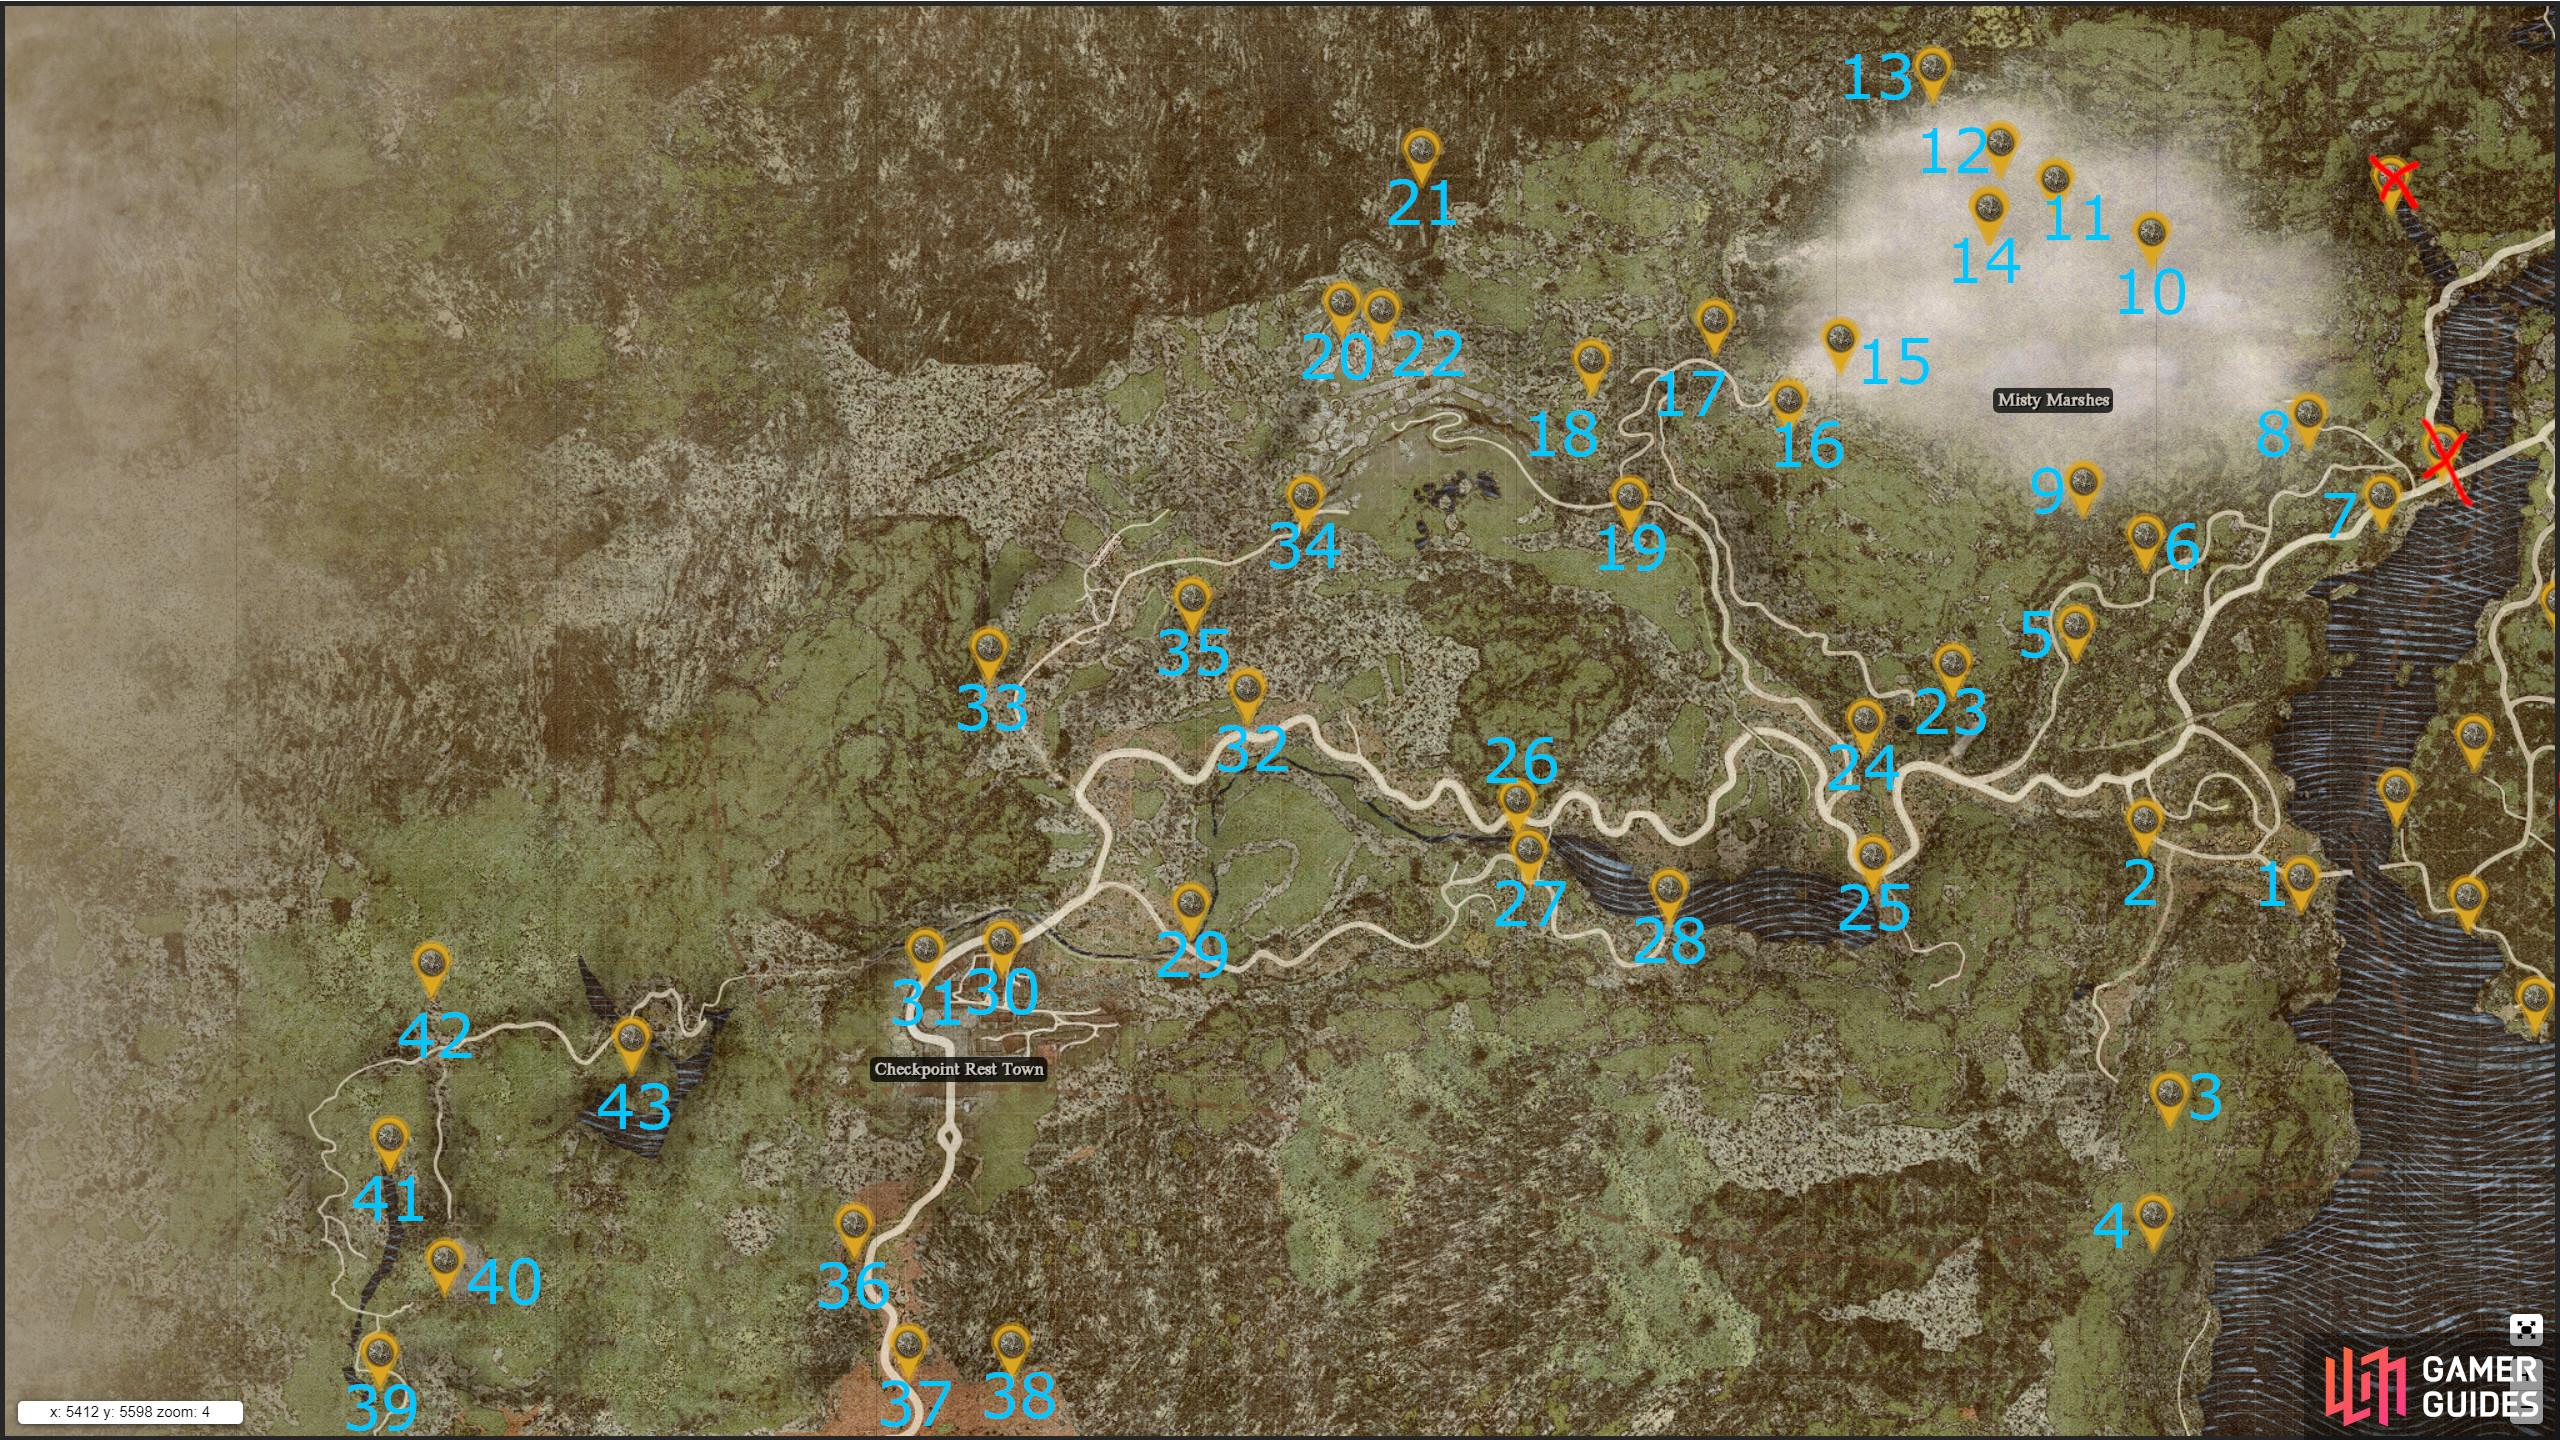 Here are all the Seeker’s Token locations we are aware of in and around Checkpoint Rest Town.